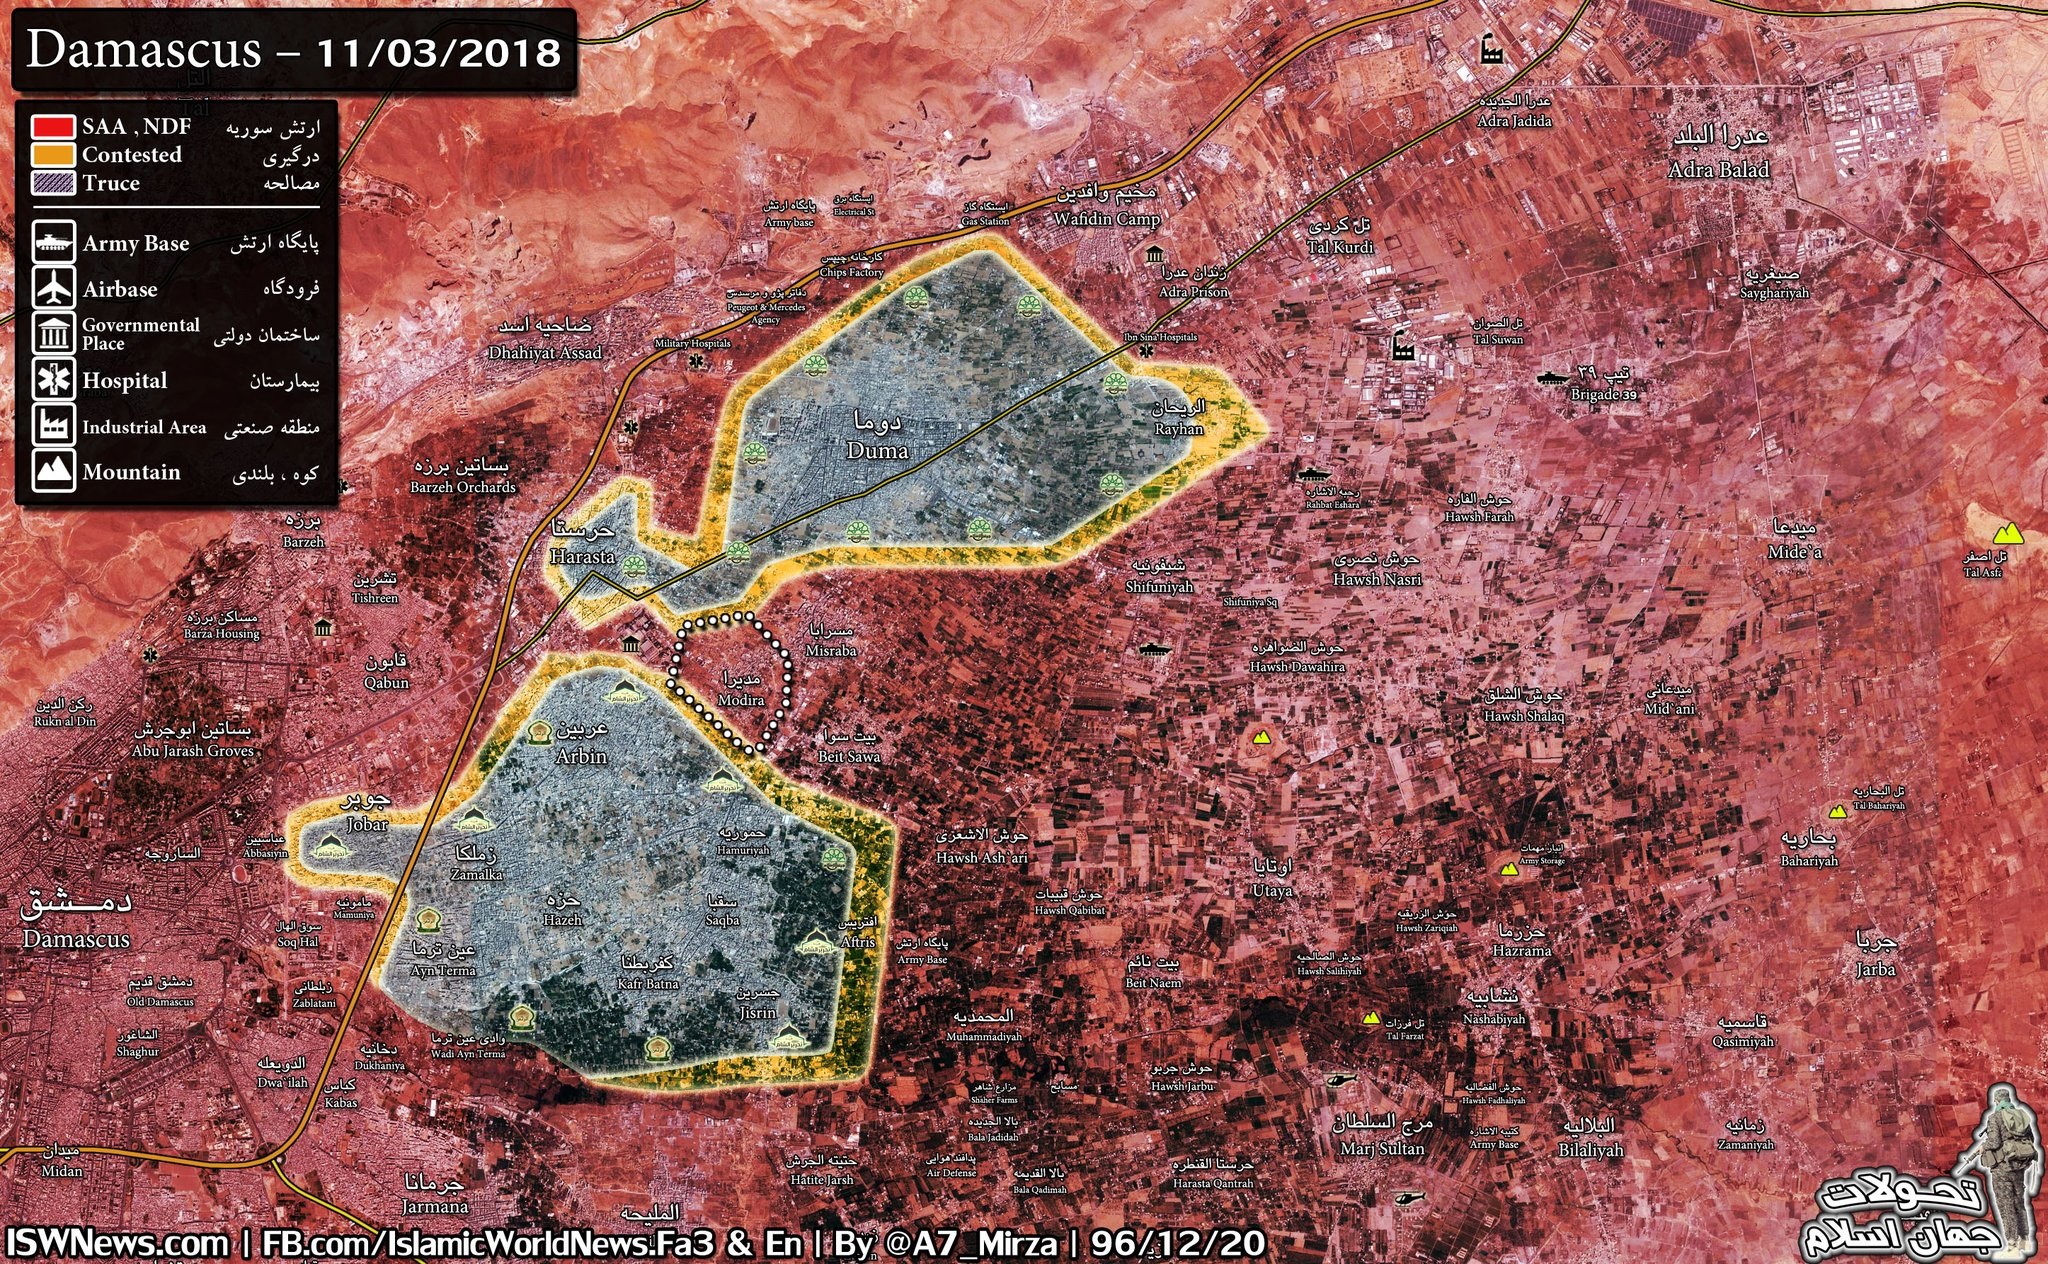 Media Accuses Syrian Army Of Using Chemical Weapons After Militants' Defense Collapses In Eastern Ghouta (Map, Video)